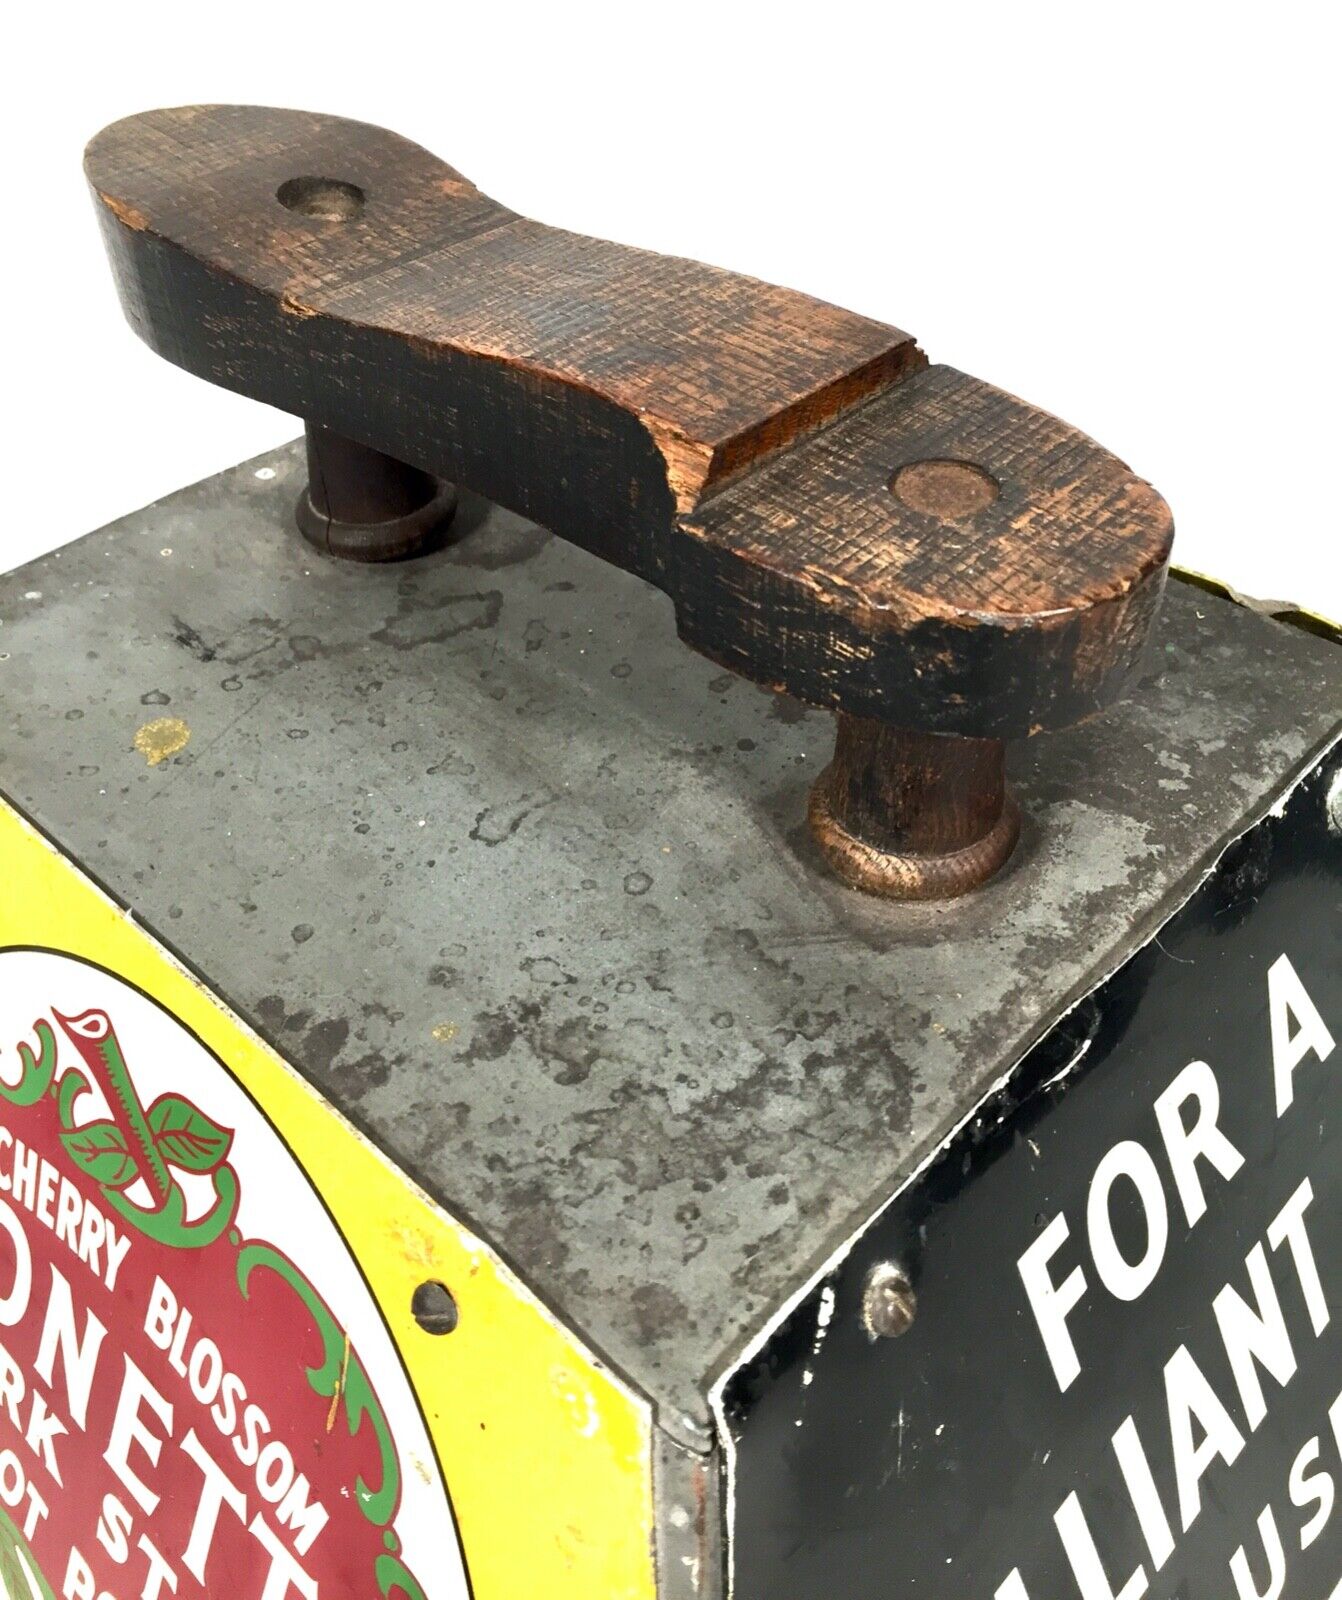 Antique Advertising Sign - Large Shoe Shine Box for Cherry Blossom Boot Polish